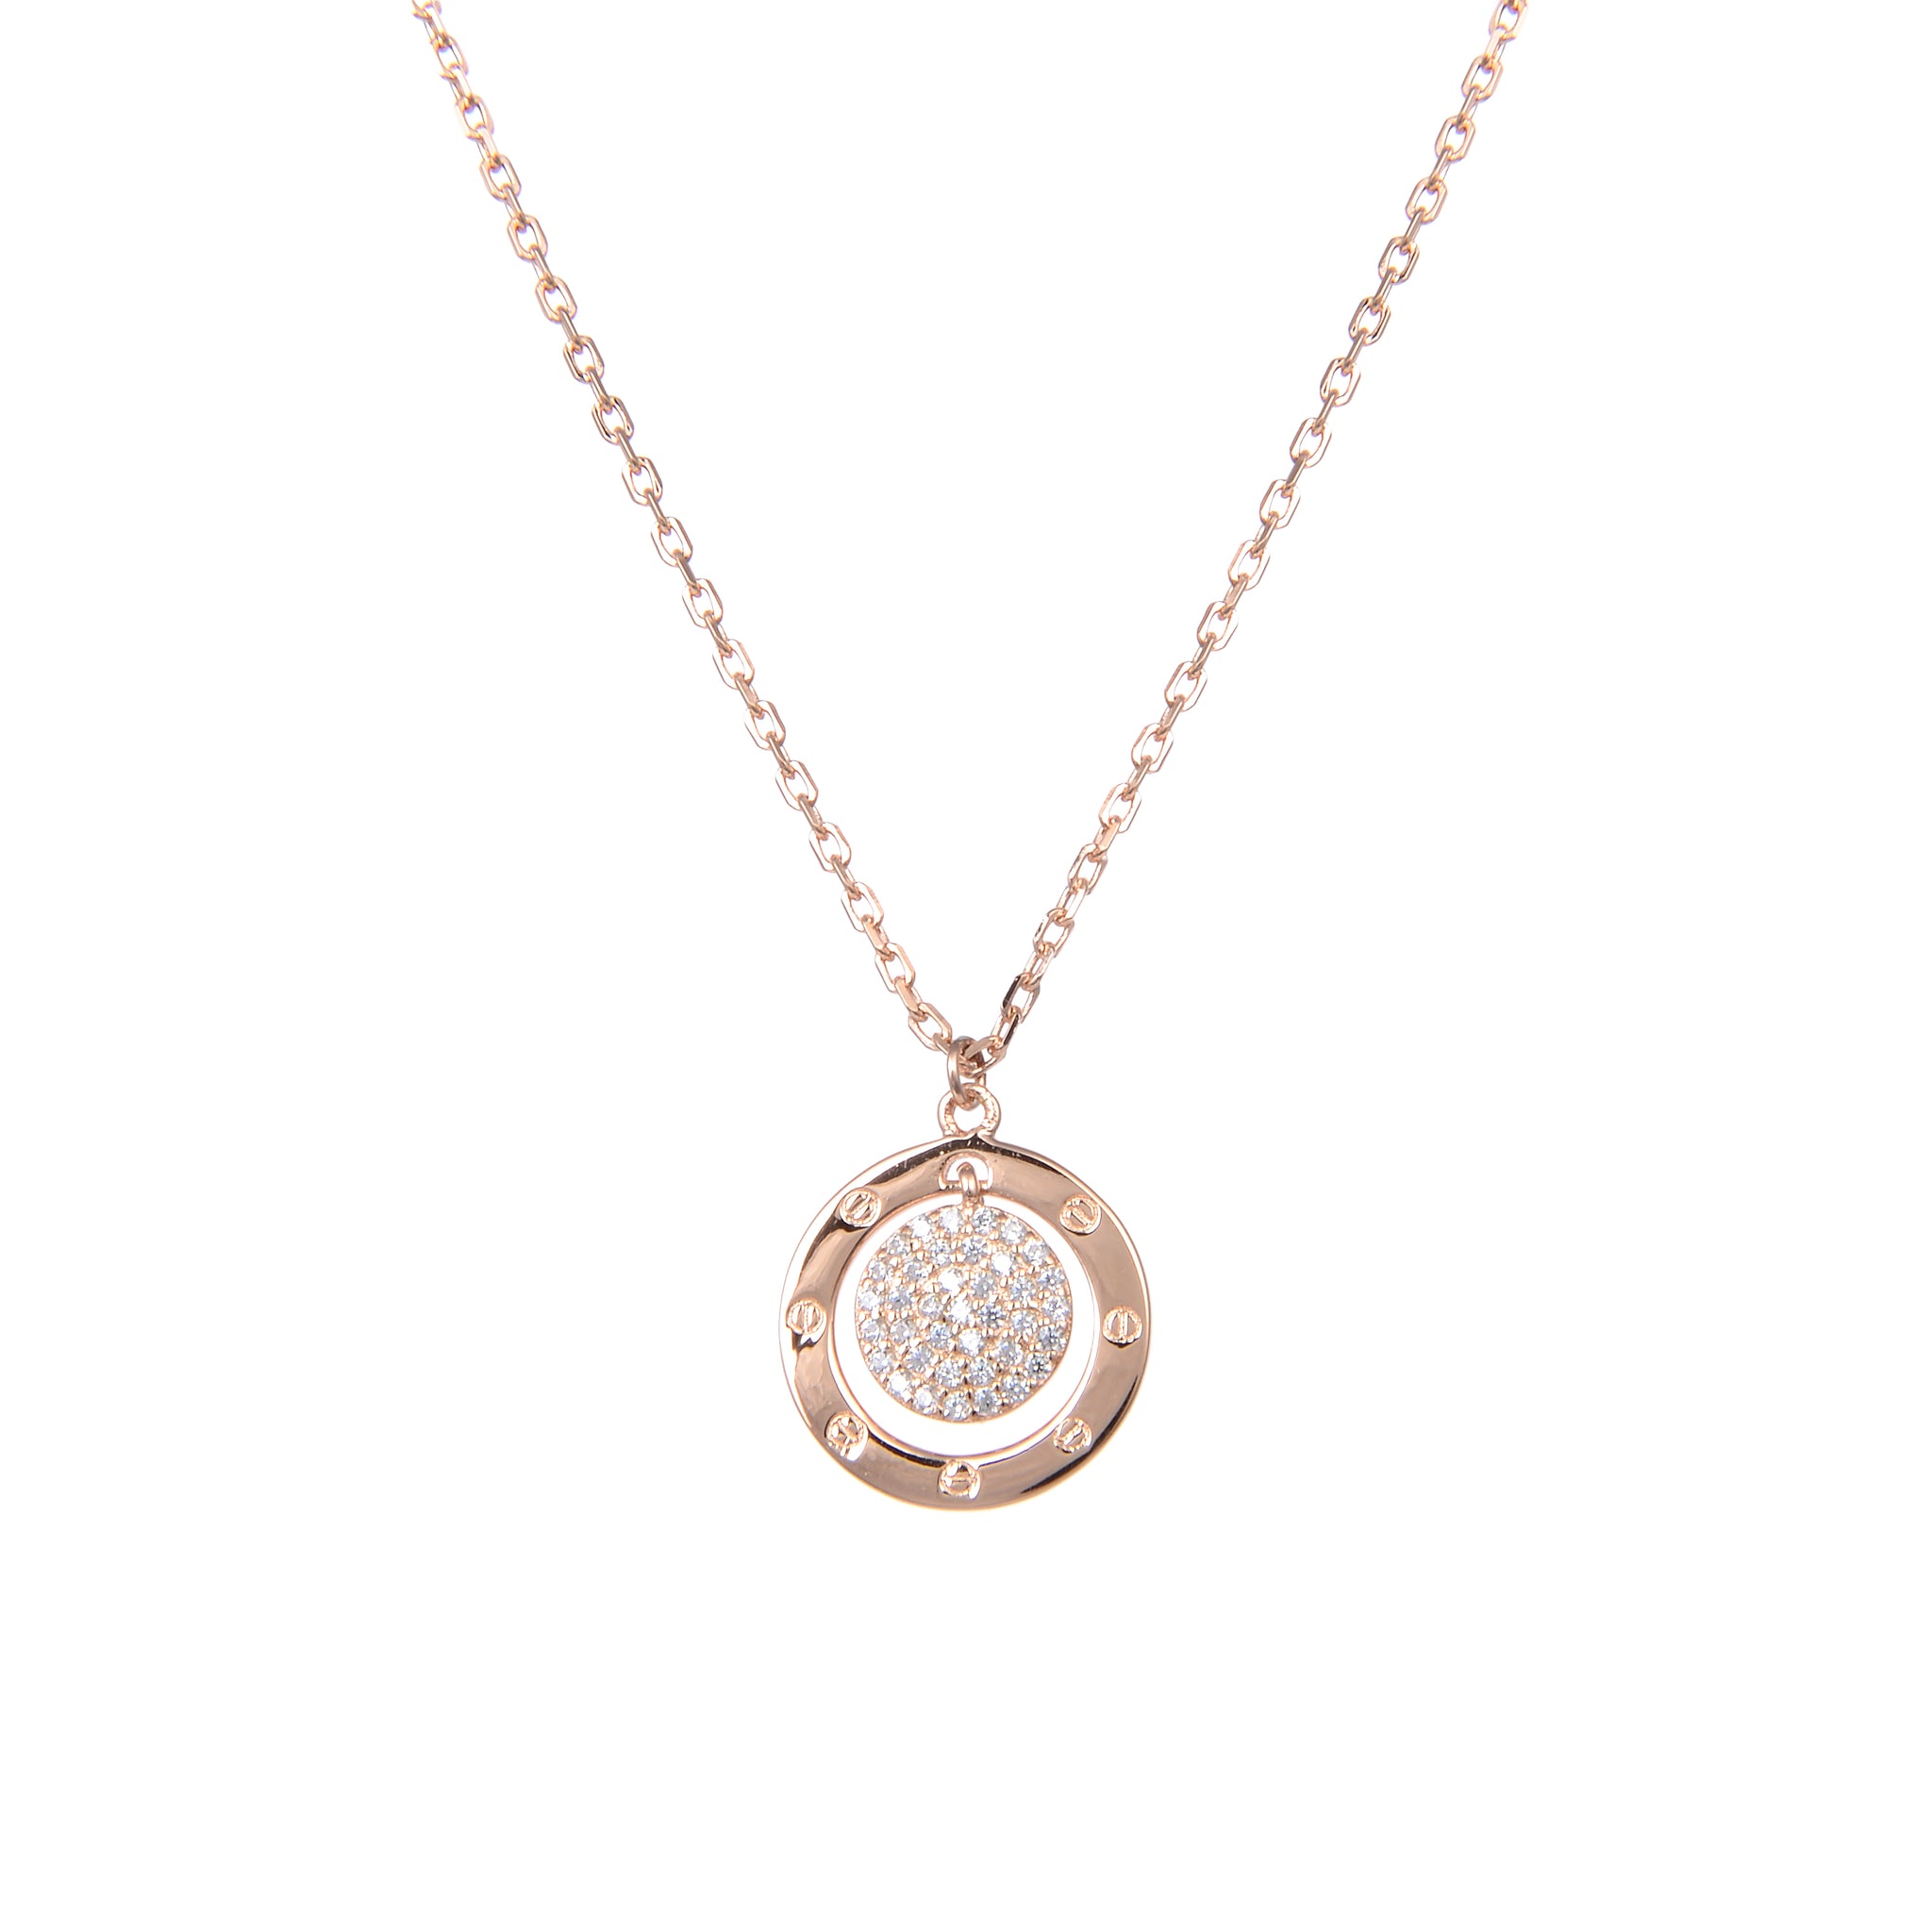 92.5 Sterling Silver Necklace Chain With CZ Cubic Zirconia Rose Gold Plated Double Ring Shape Sterling Silver Pendant